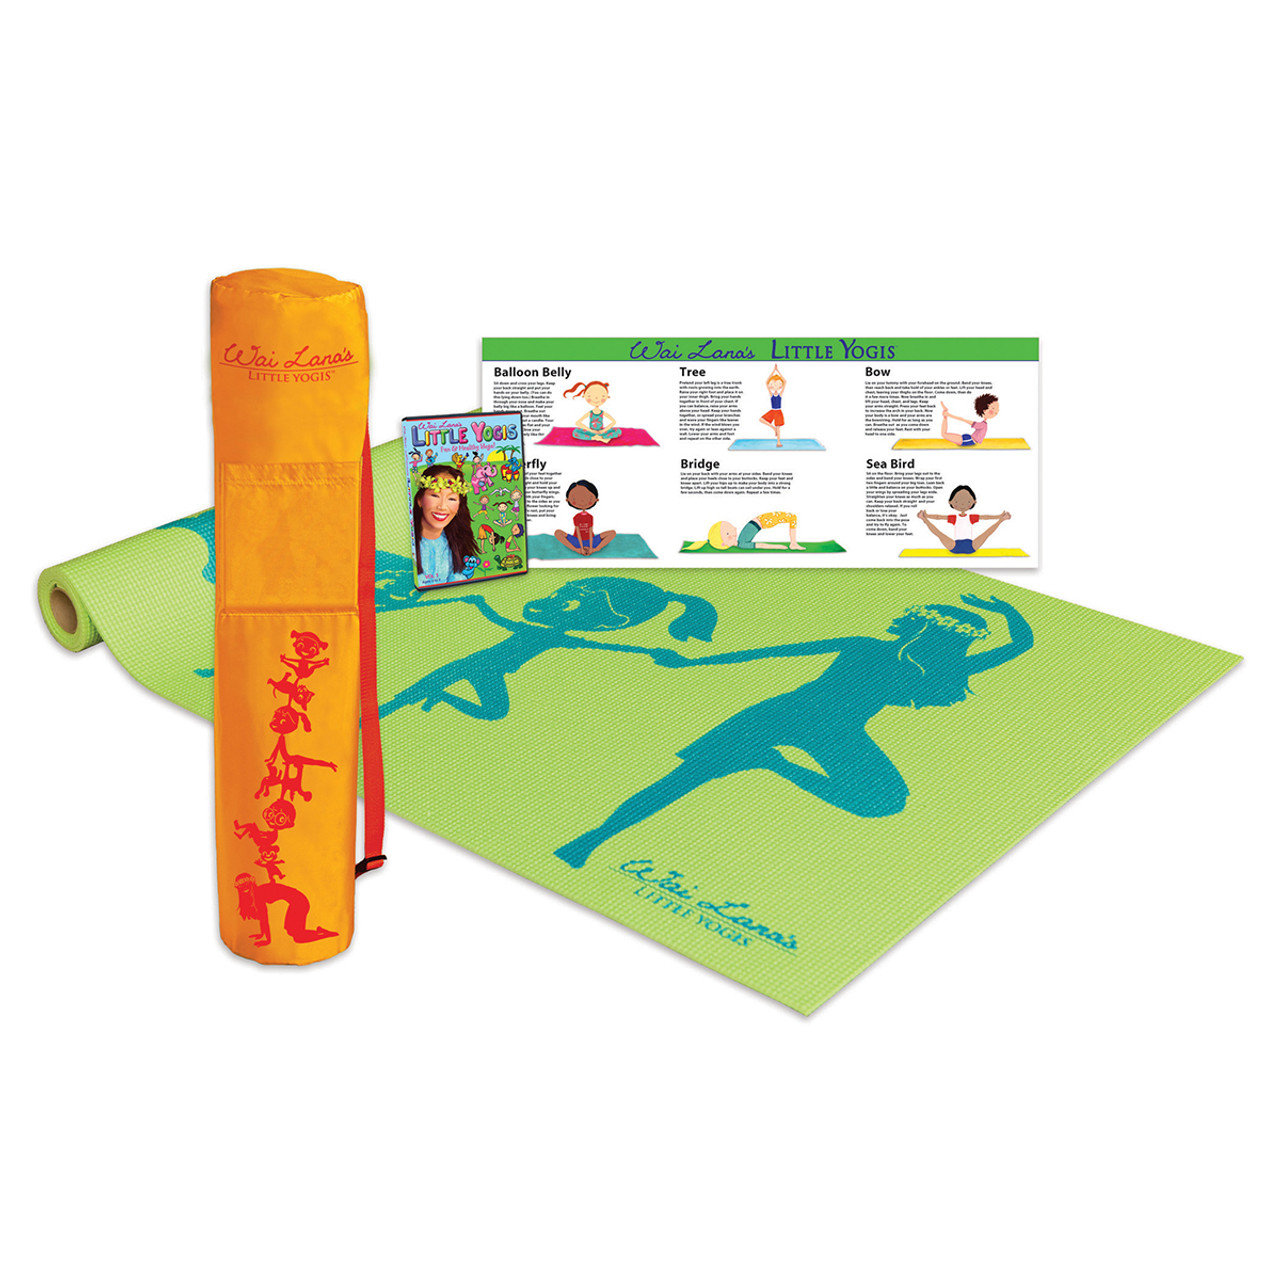 Yoga for Kids DVD, mat, bag, poster, stickers